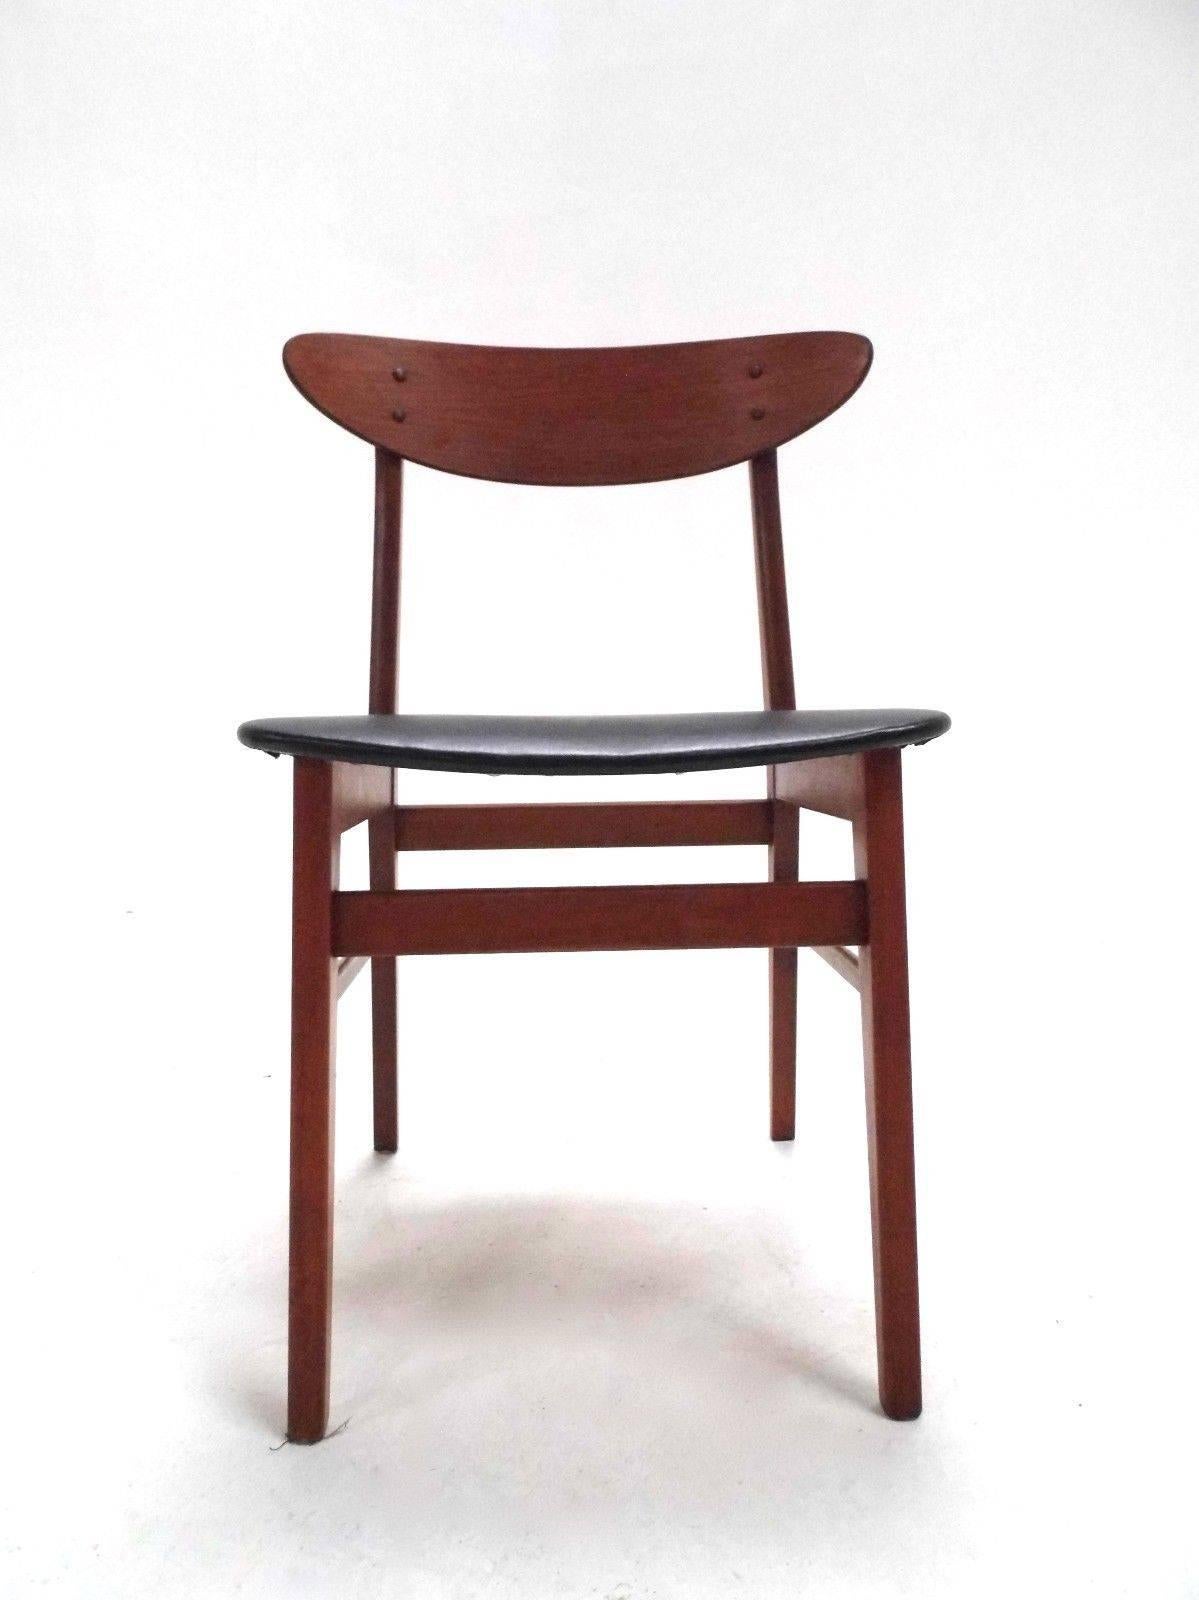 A beautiful Danish set of four teak dining chairs by Farstrup, this would make a stylish addition to any dining area. The chairs have wide seat pads and curved backrests for enhanced comfort. A striking piece of classically designed Scandinavian